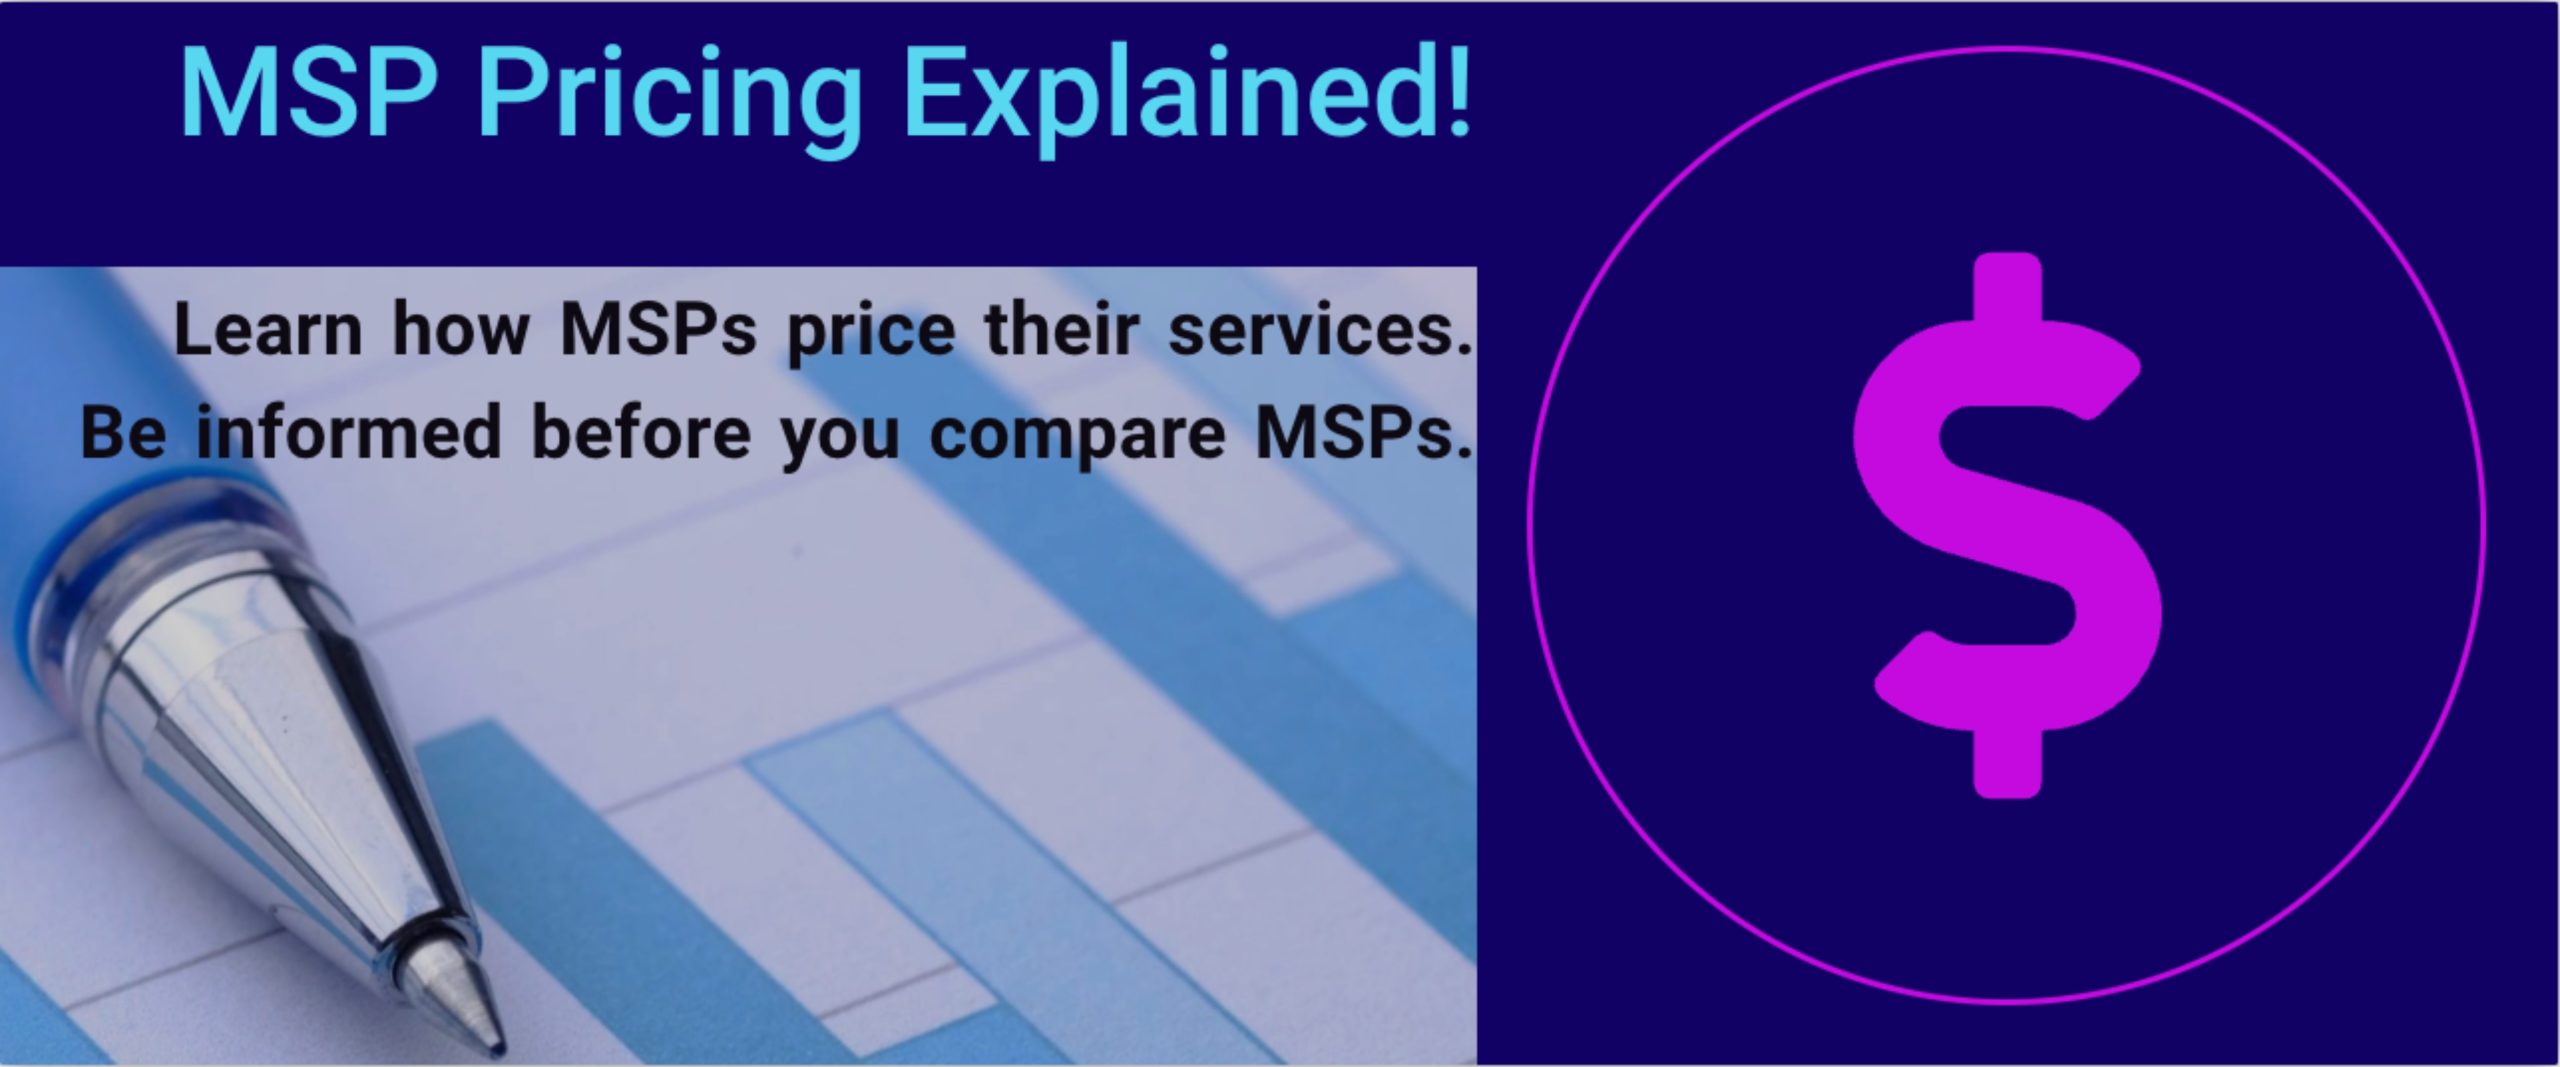 MSP Pricing Explained